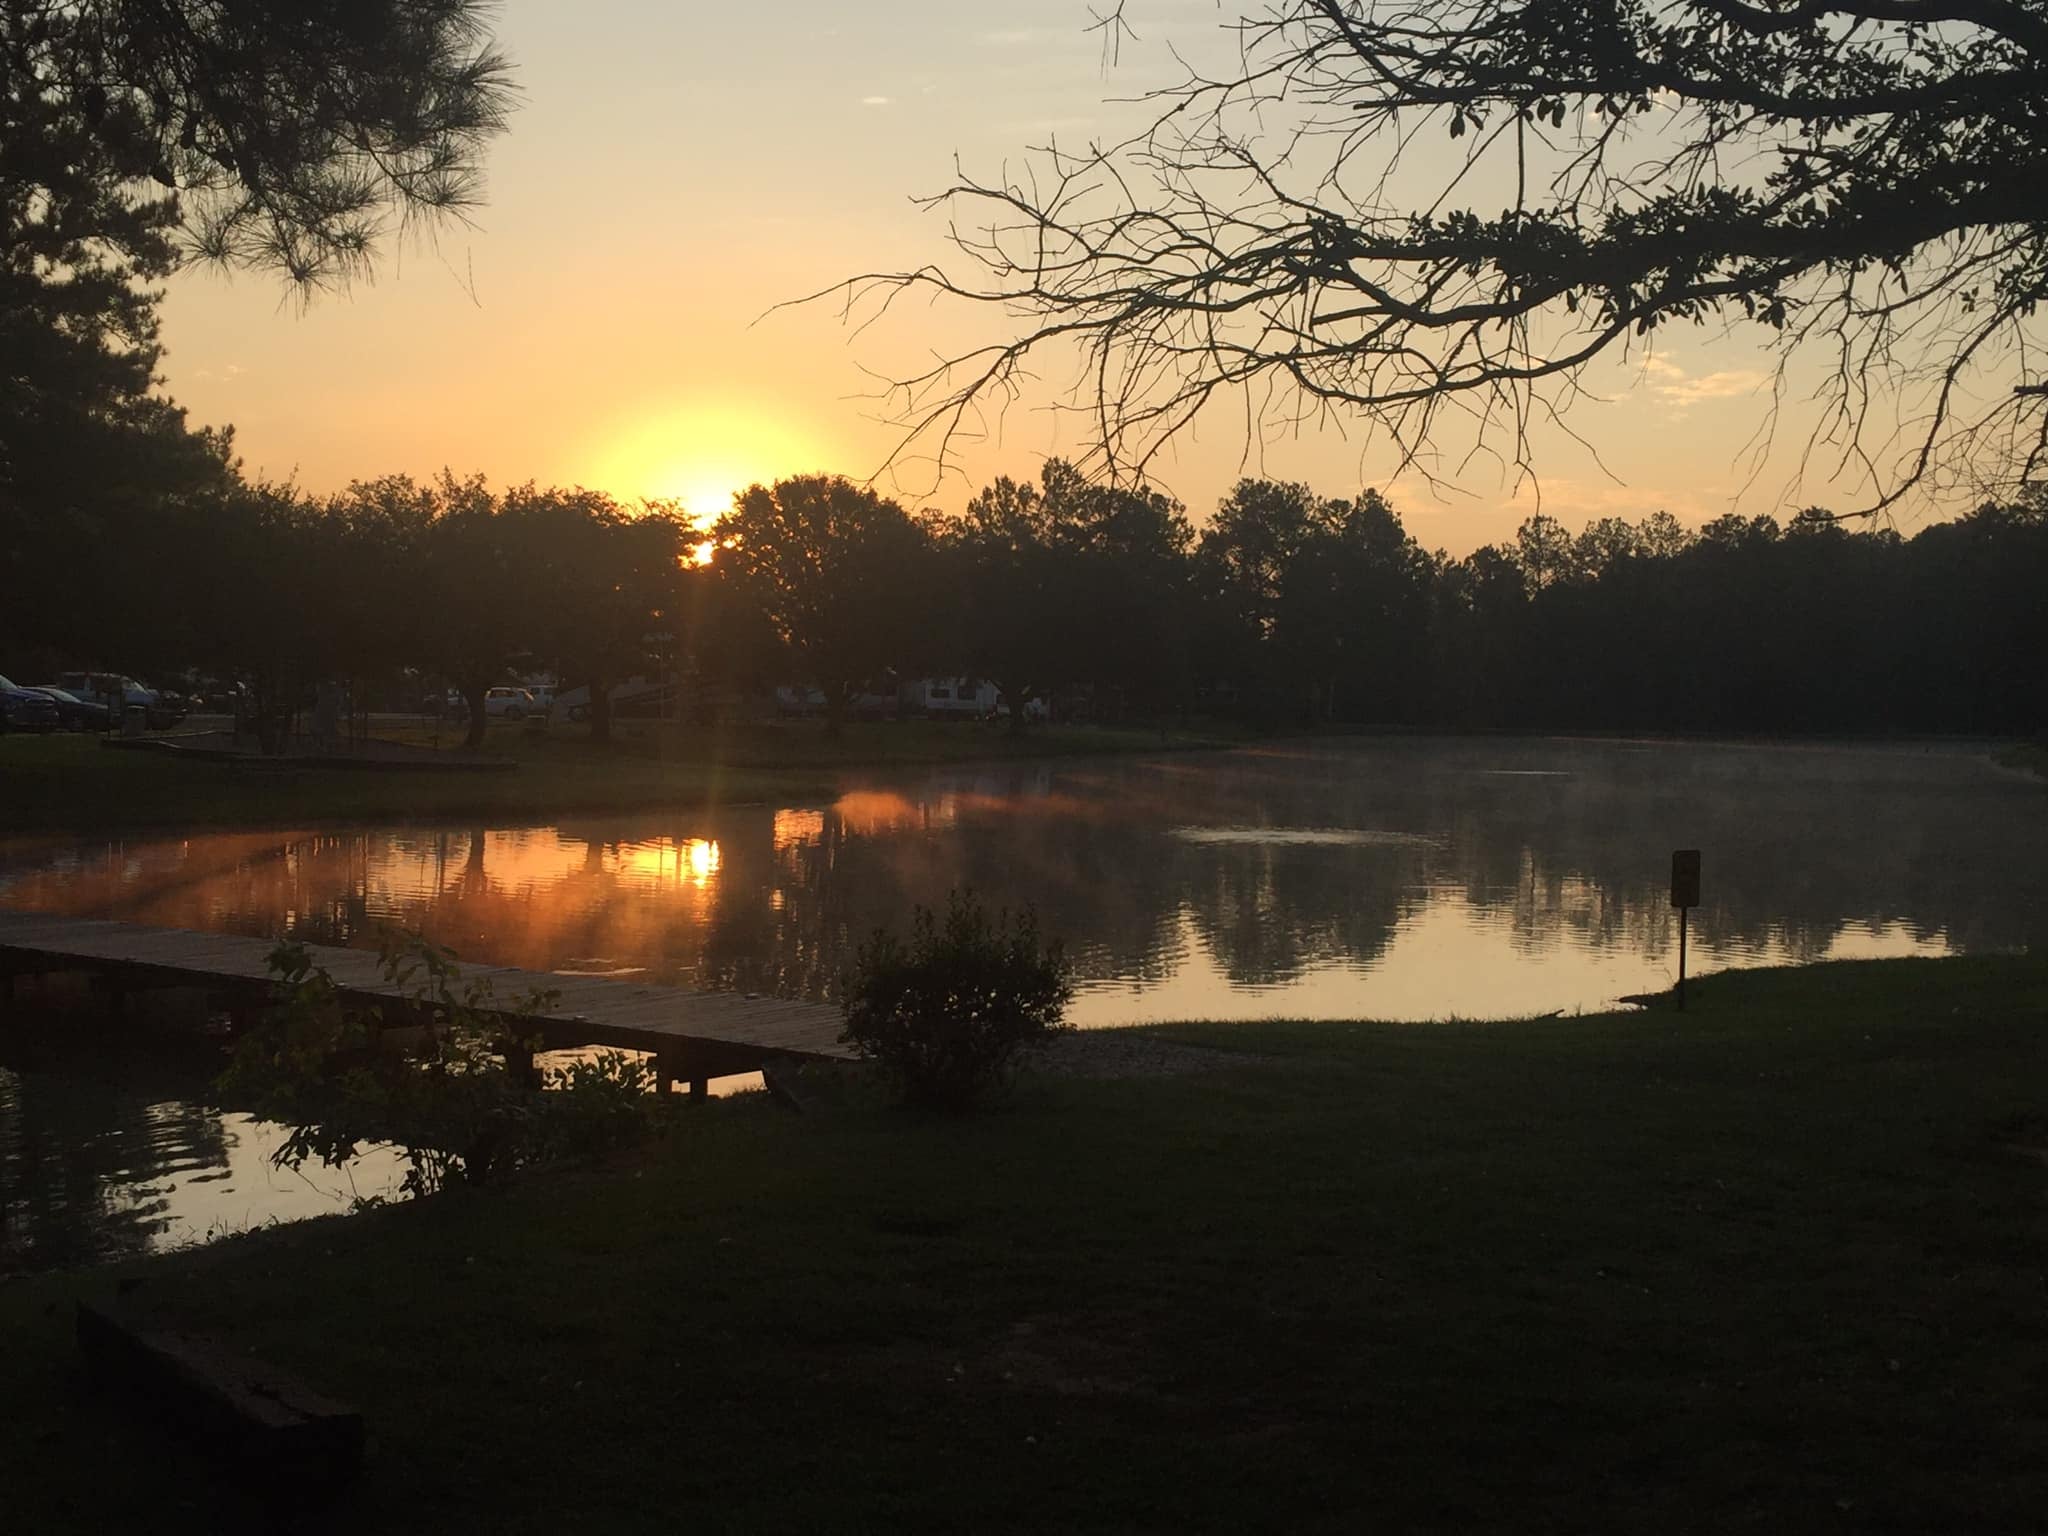 Camper submitted image from Hattiesburg / Okatoma River KOA - 2